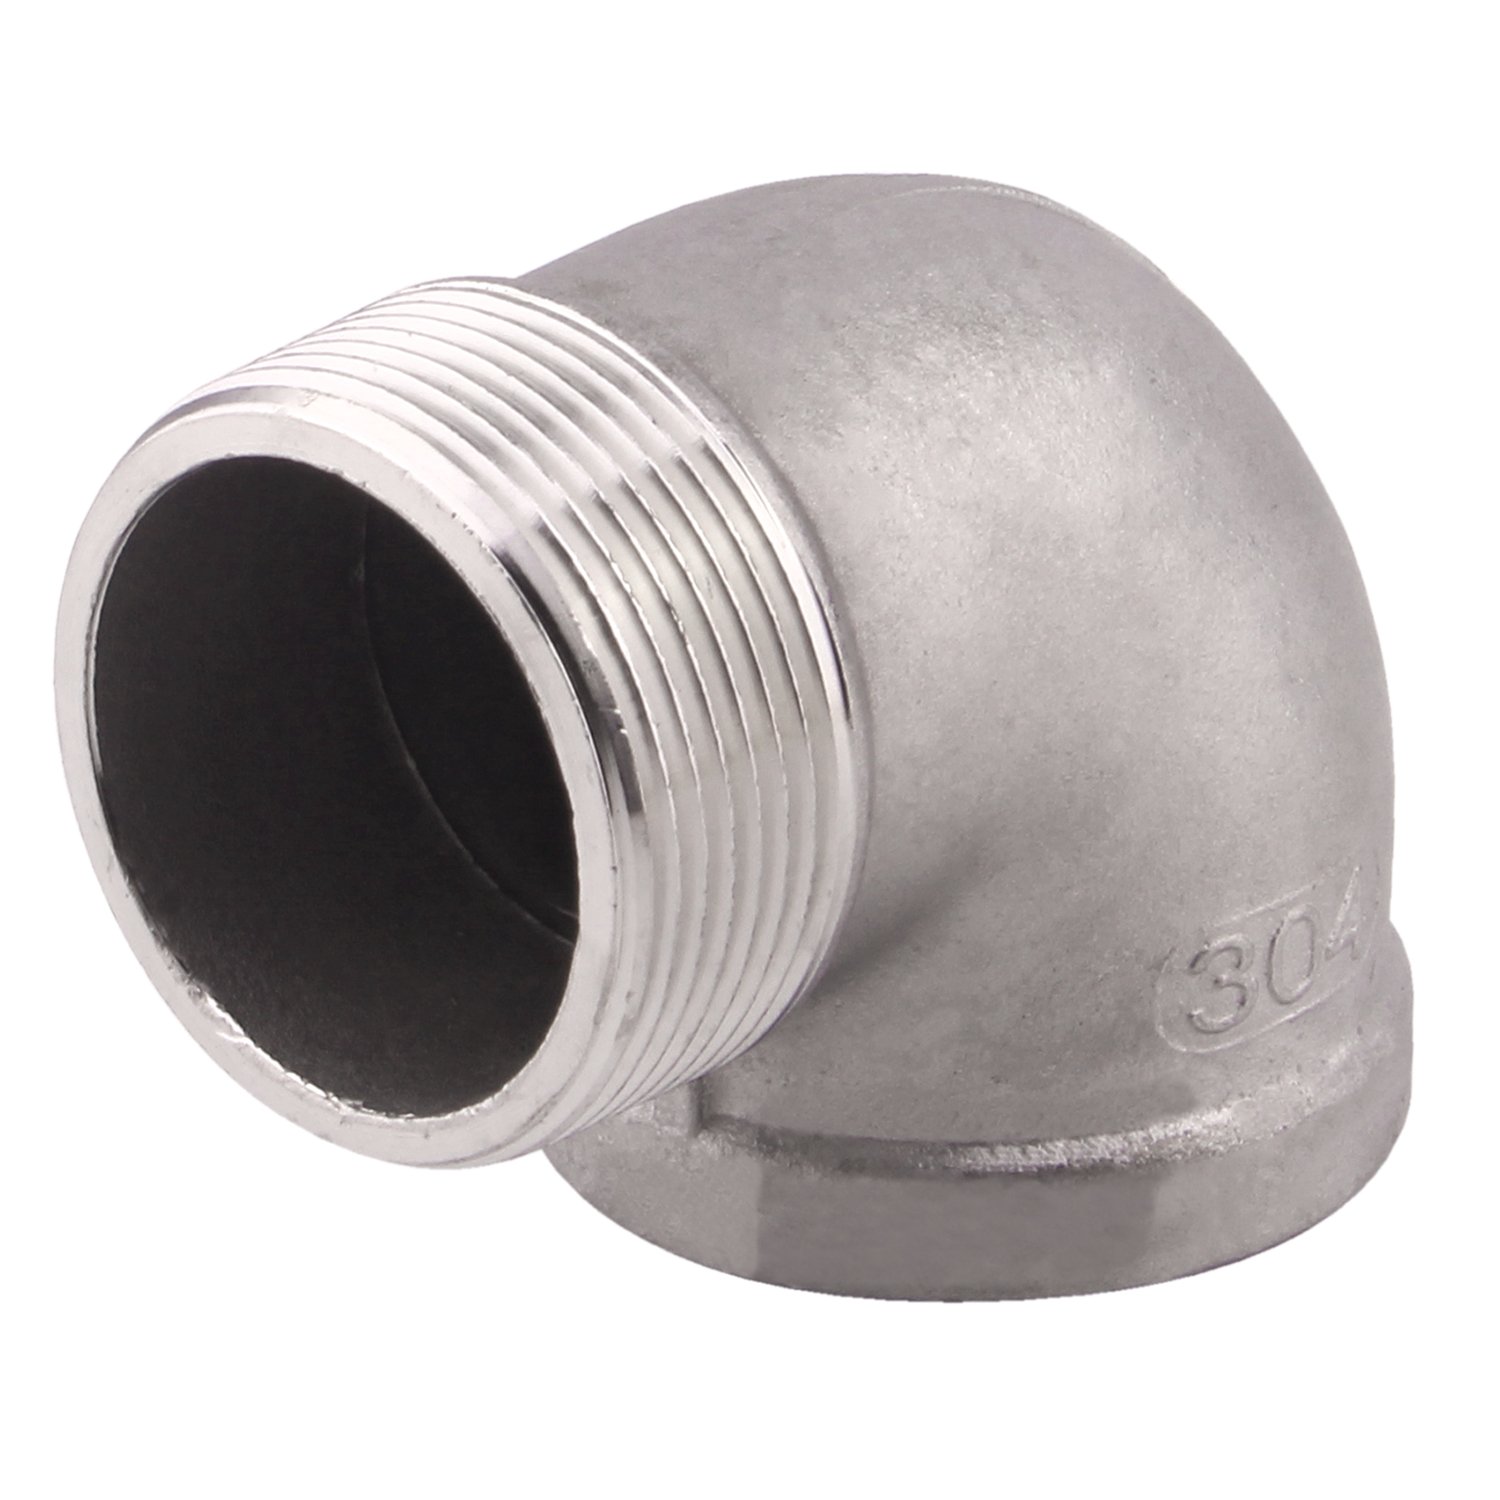 OEM Foundry Stainless Steel Pump Valve Reducing Elbow Casting Parts